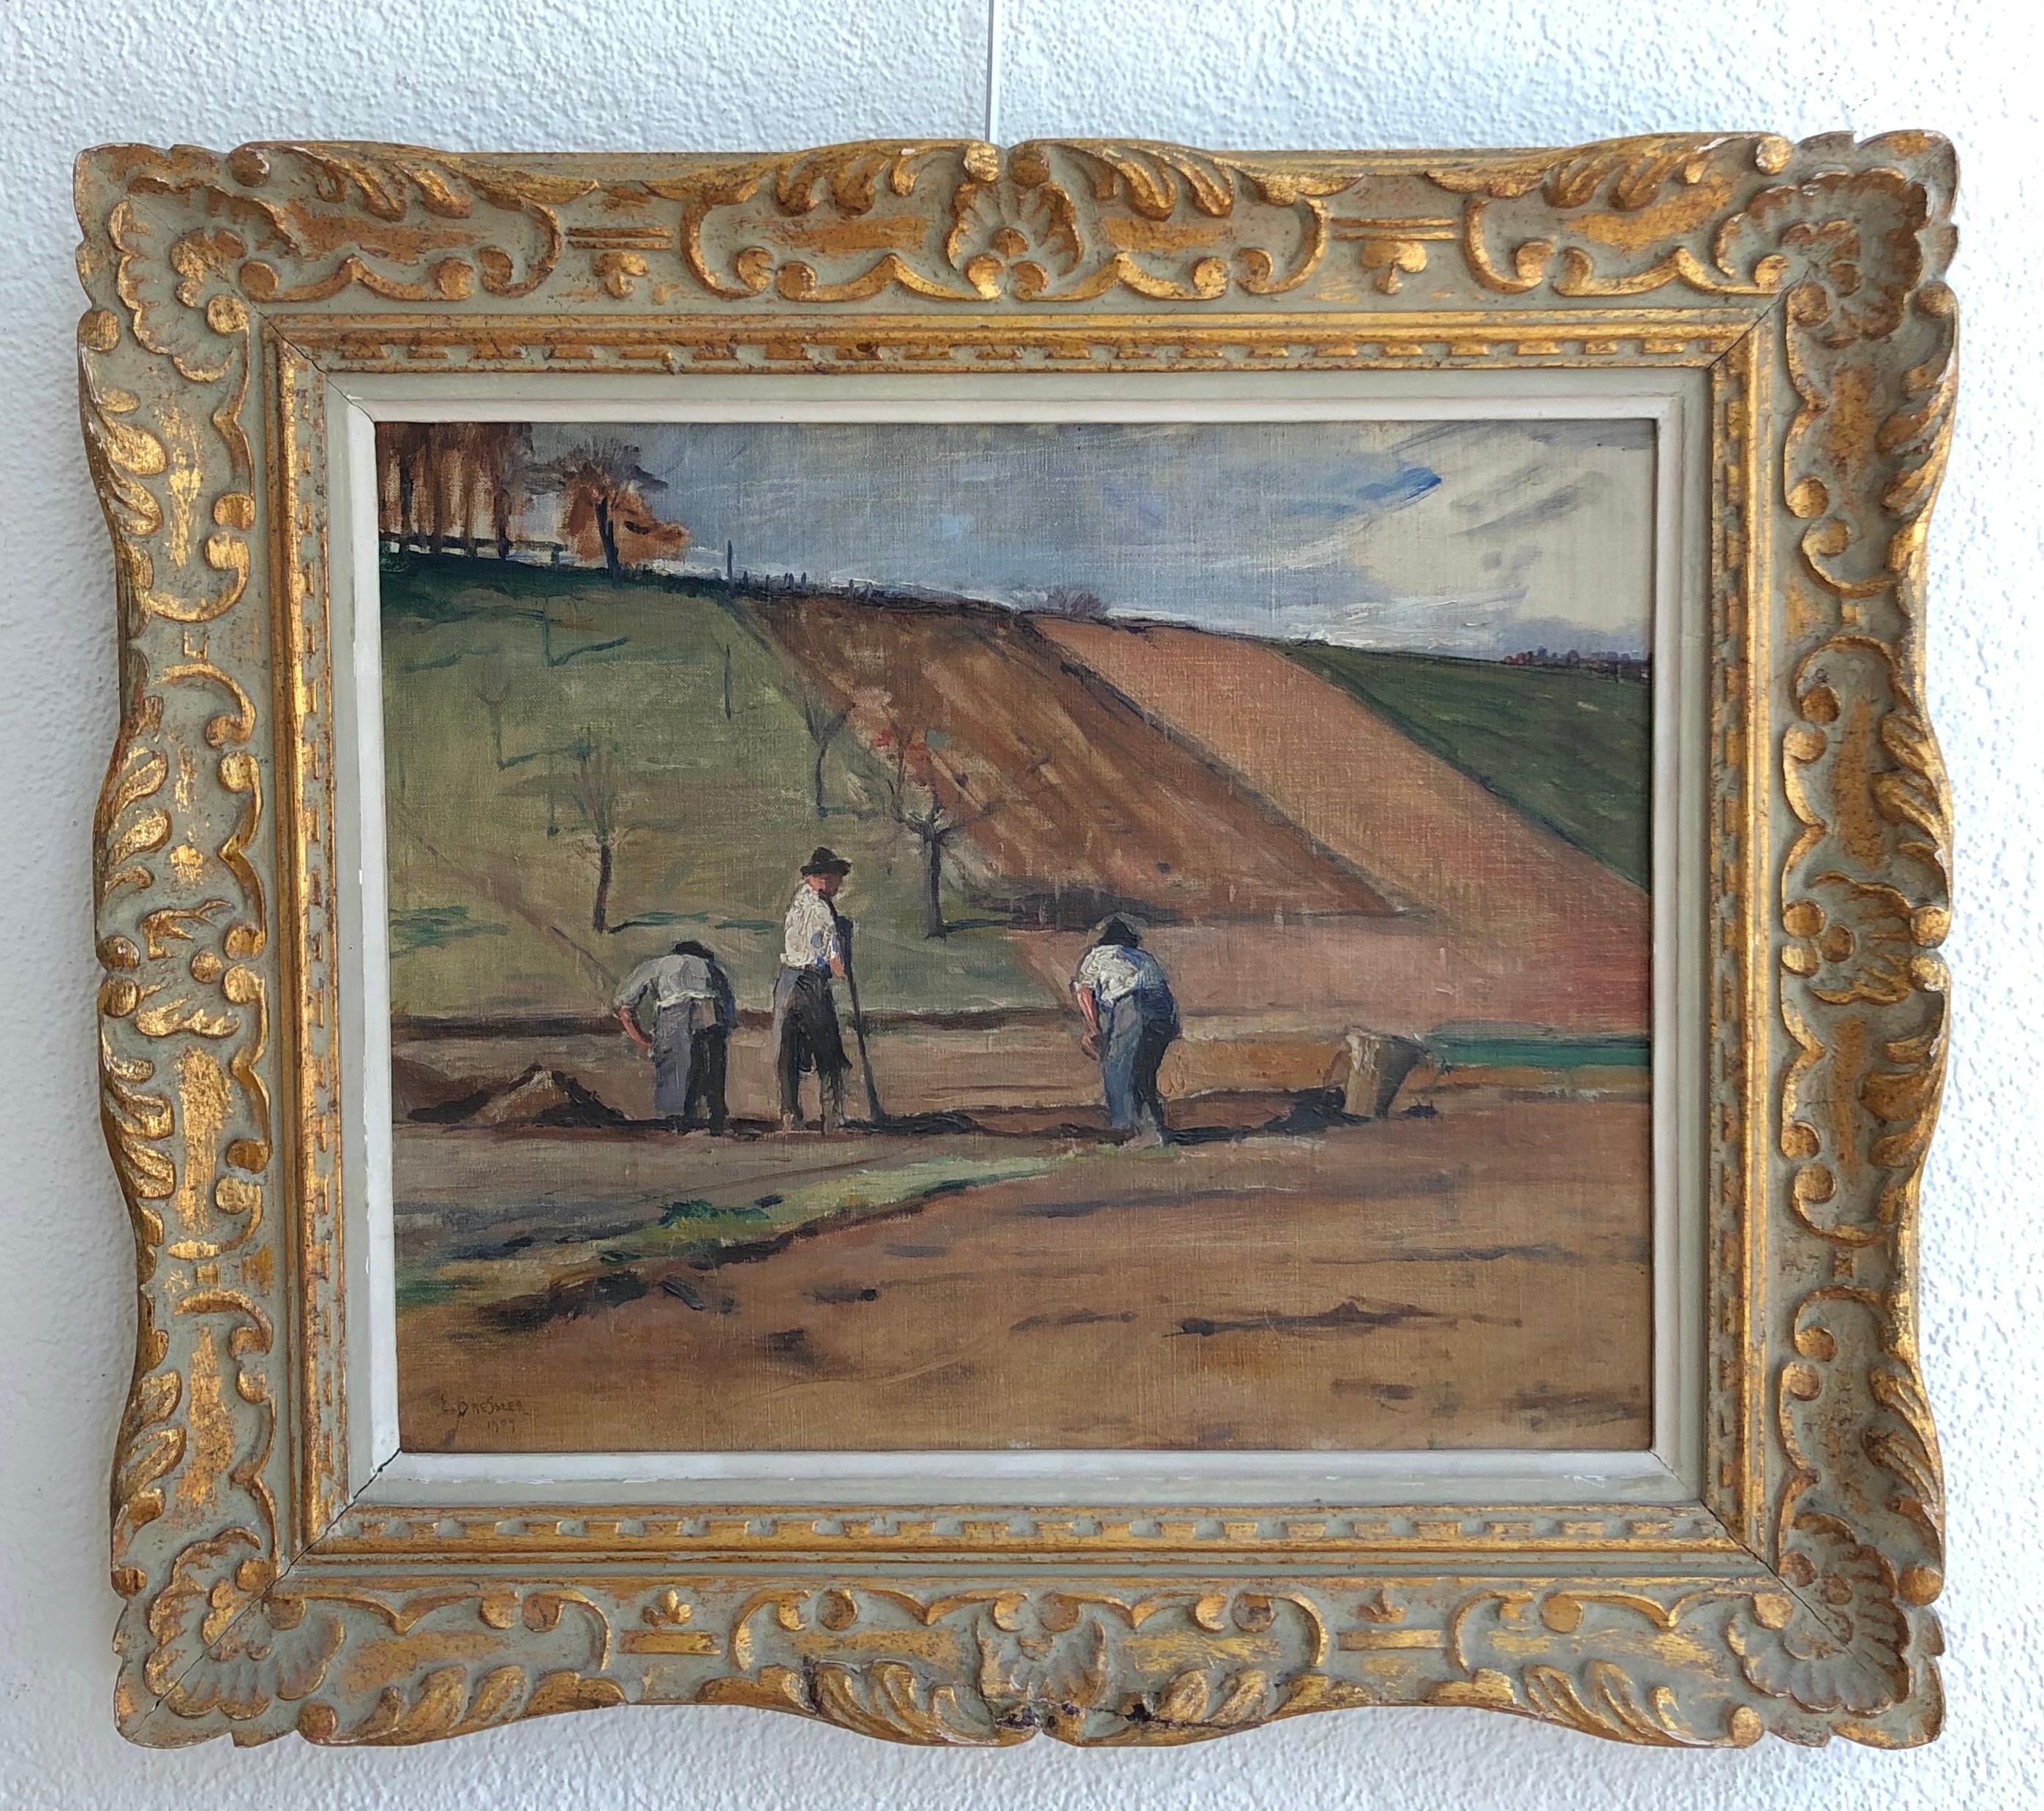 Peasants plowing the land - Painting by Emile Bressler